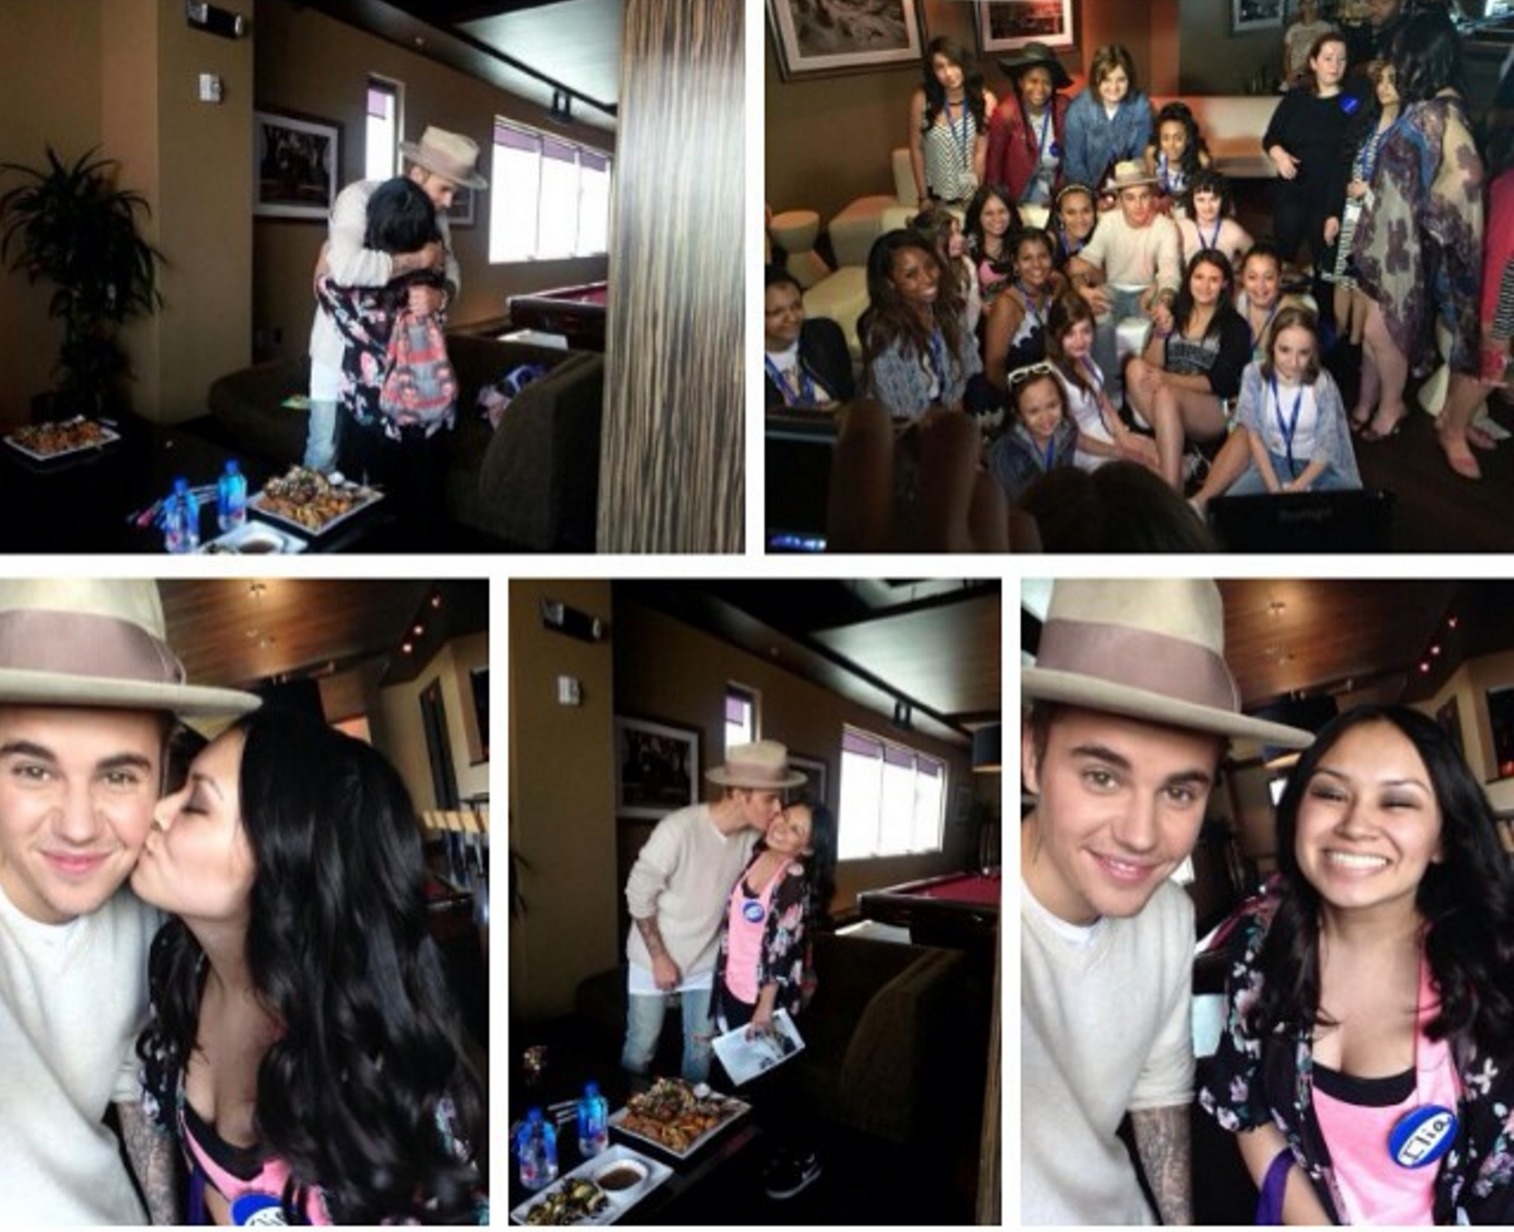 Justin Bieber and his team have made over 250 Make-A-Wish dreams come true.